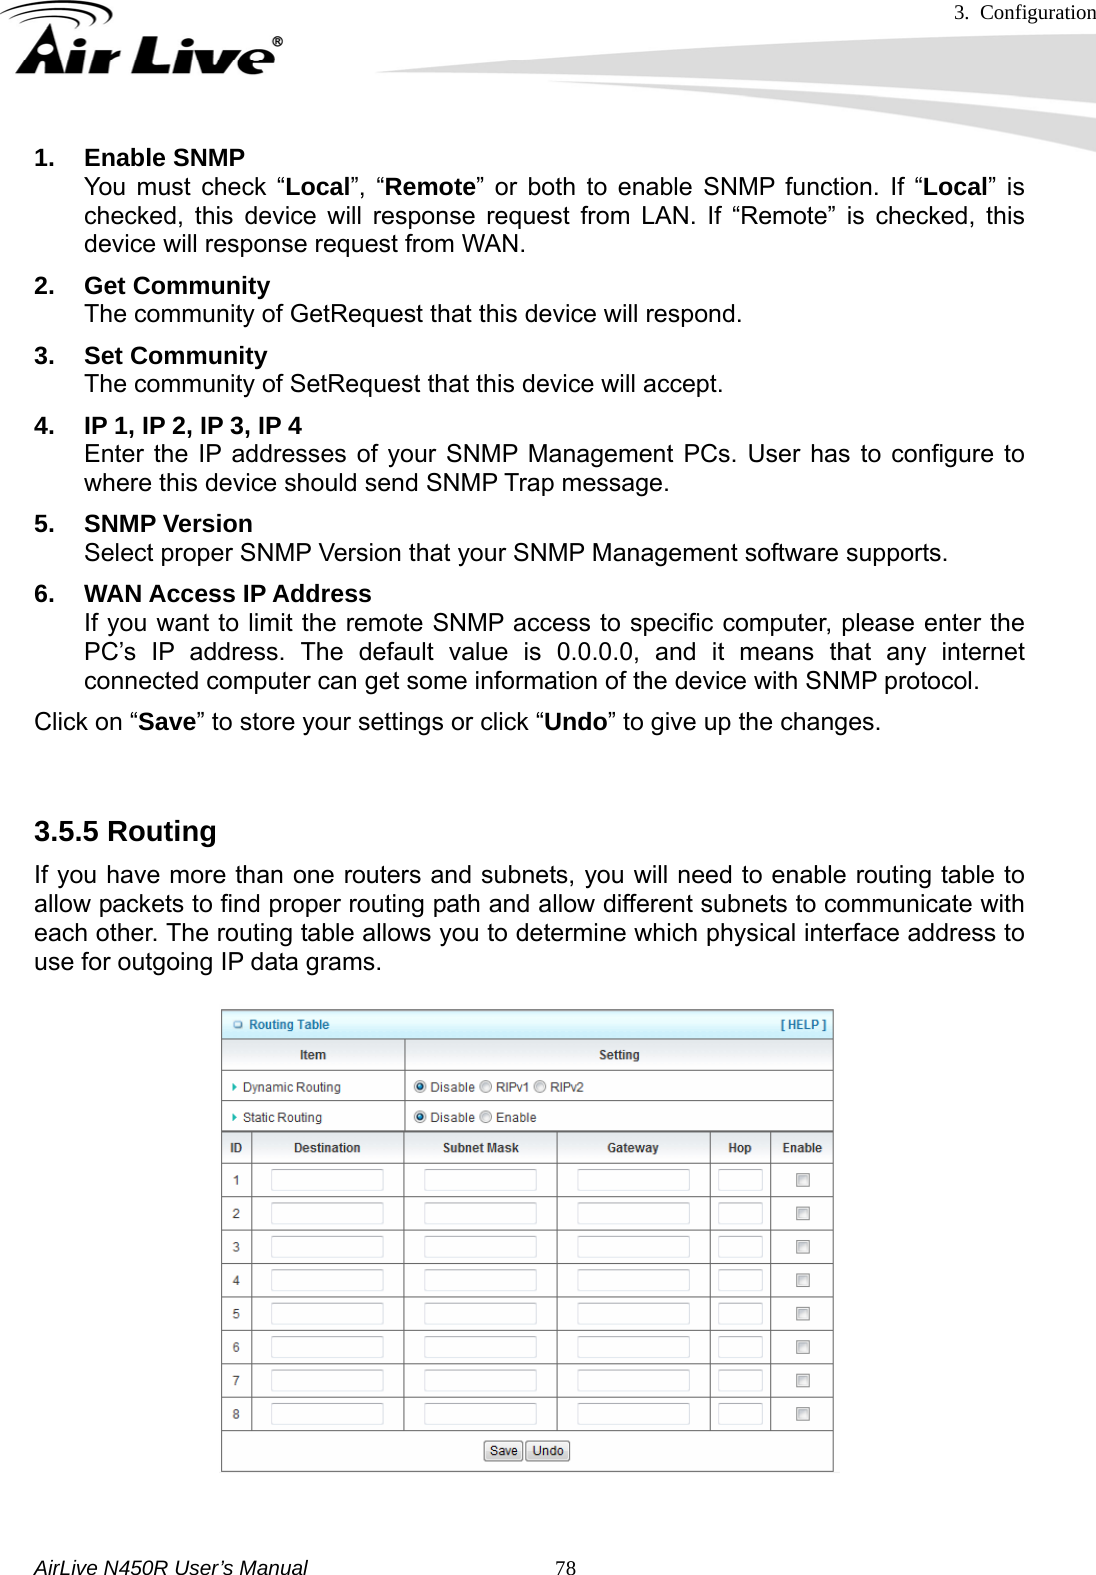 3. Configuration     AirLive N450R User’s Manual   781. Enable SNMP You must check “Local”, “Remote” or both to enable SNMP function. If “Local” is checked, this device will response request from LAN. If “Remote” is checked, this device will response request from WAN. 2. Get Community The community of GetRequest that this device will respond. 3. Set Community The community of SetRequest that this device will accept. 4.  IP 1, IP 2, IP 3, IP 4 Enter the IP addresses of your SNMP Management PCs. User has to configure to where this device should send SNMP Trap message. 5. SNMP Version Select proper SNMP Version that your SNMP Management software supports. 6.  WAN Access IP Address If you want to limit the remote SNMP access to specific computer, please enter the PC’s IP address. The default value is 0.0.0.0, and it means that any internet connected computer can get some information of the device with SNMP protocol. Click on “Save” to store your settings or click “Undo” to give up the changes.  3.5.5 Routing   If you have more than one routers and subnets, you will need to enable routing table to allow packets to find proper routing path and allow different subnets to communicate with each other. The routing table allows you to determine which physical interface address to use for outgoing IP data grams.    